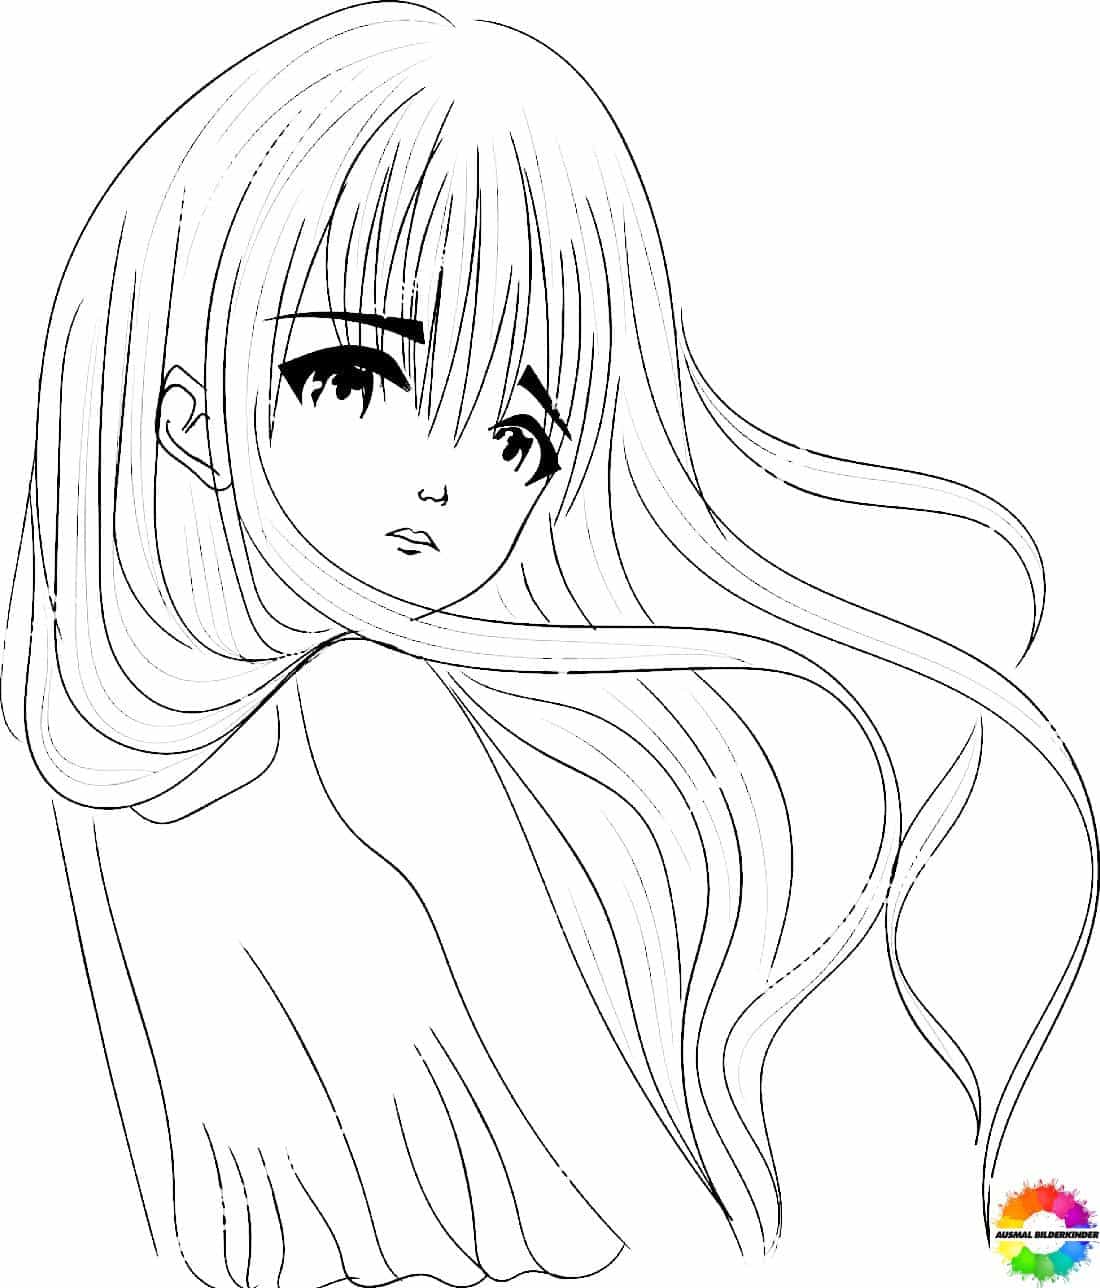 Sexy Anime Coloring Page / Digital Download / Manga Girl / - Etsy Ireland